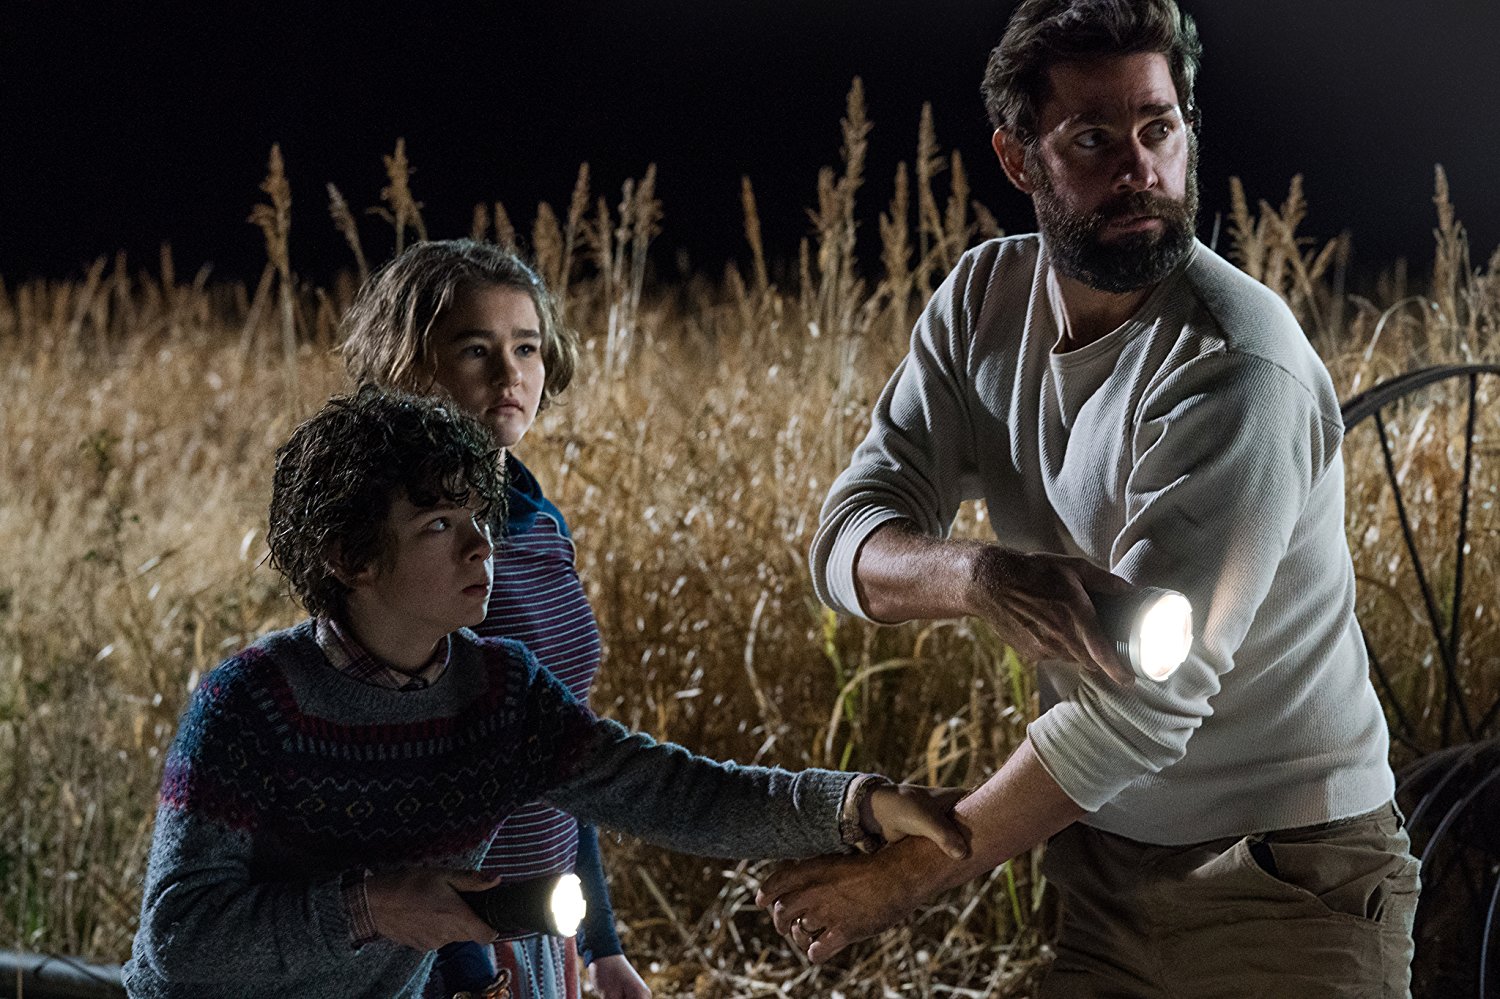 A Quiet Place: A Deep Dive into Silence and Survival